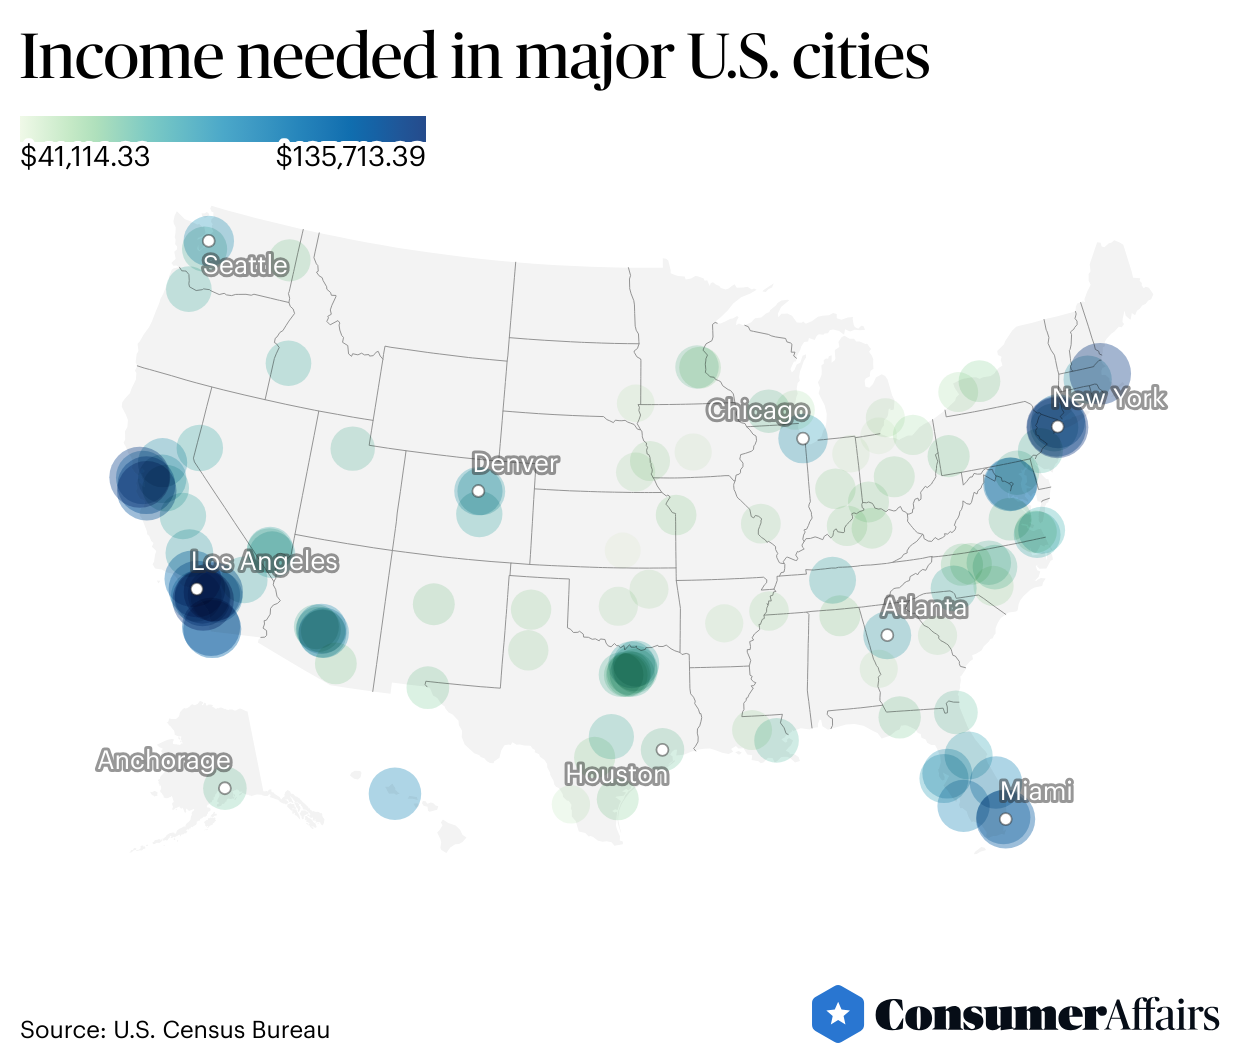 Heatmap showing “Income needed in major U.S. cities” results.